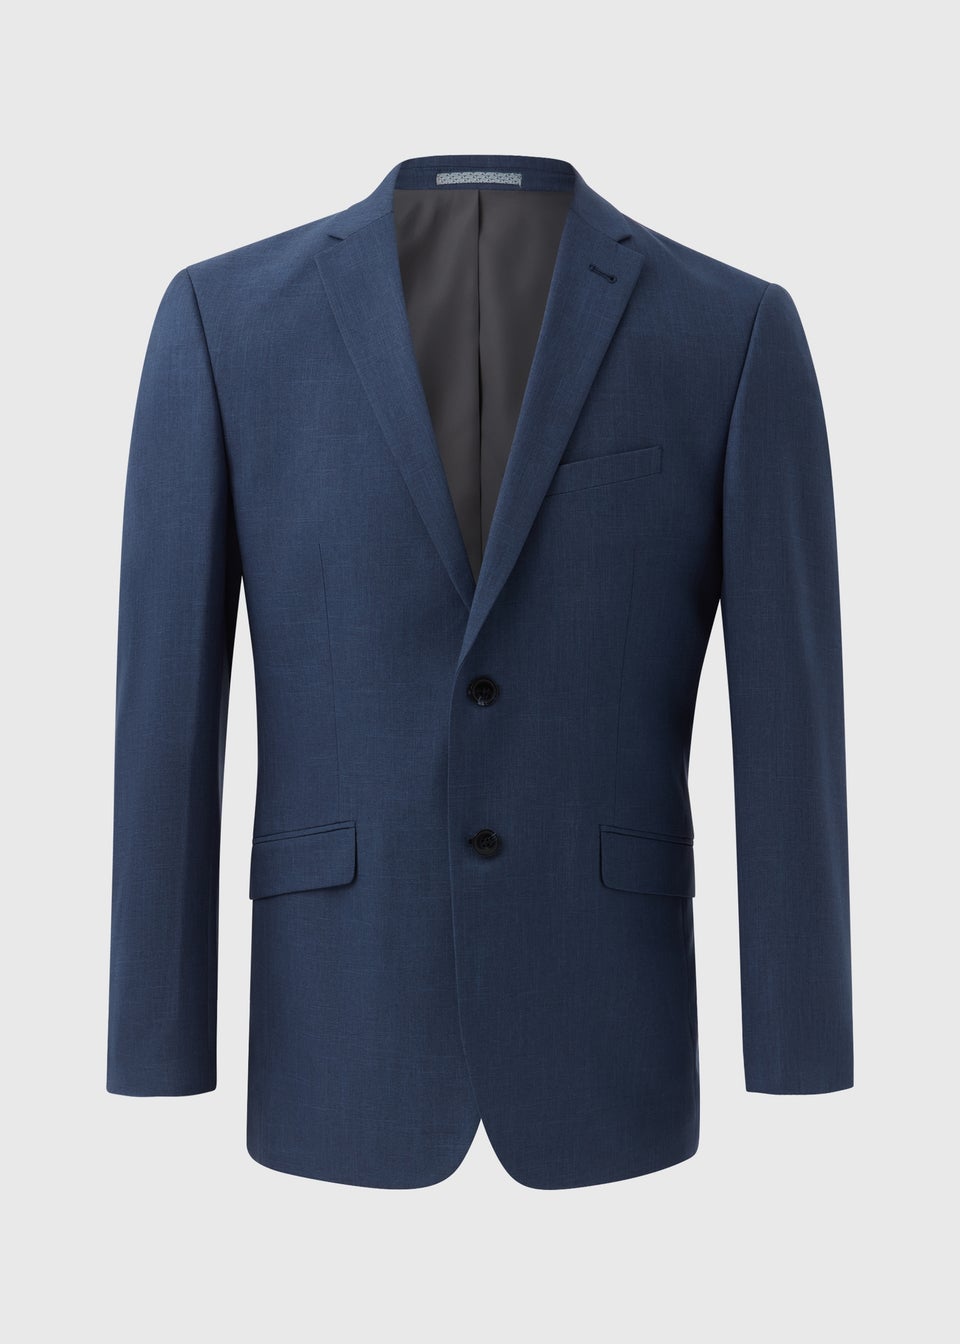 Taylor & Wright Blue Lennon Tailored Fit Jacket